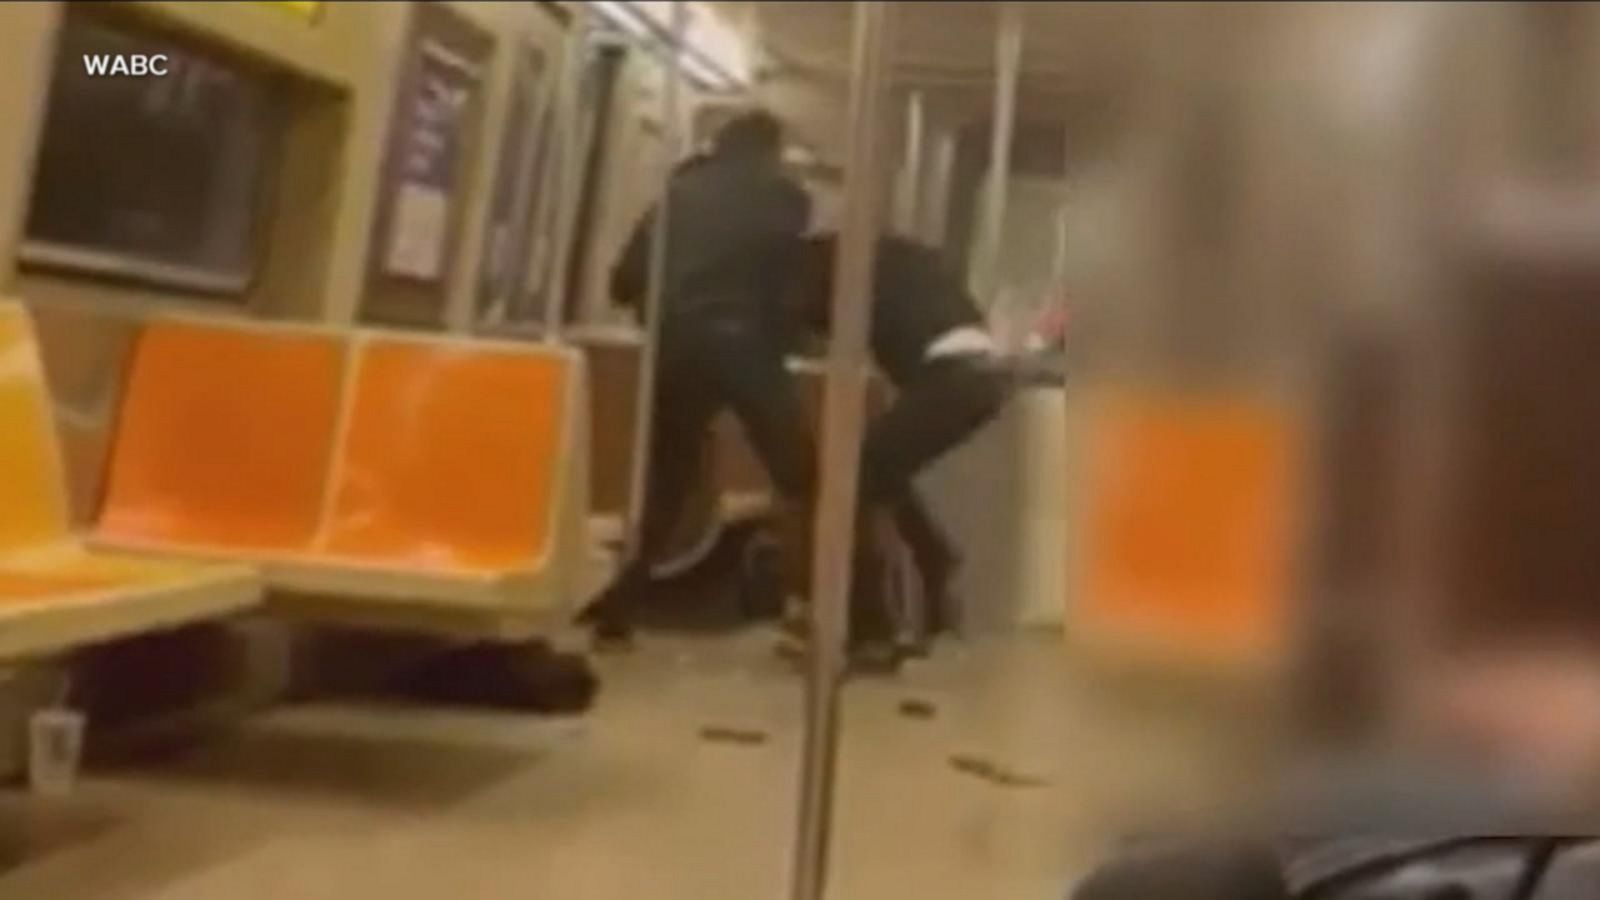 Police seeking assailant who allegedly used anti-gay slur in subway ...